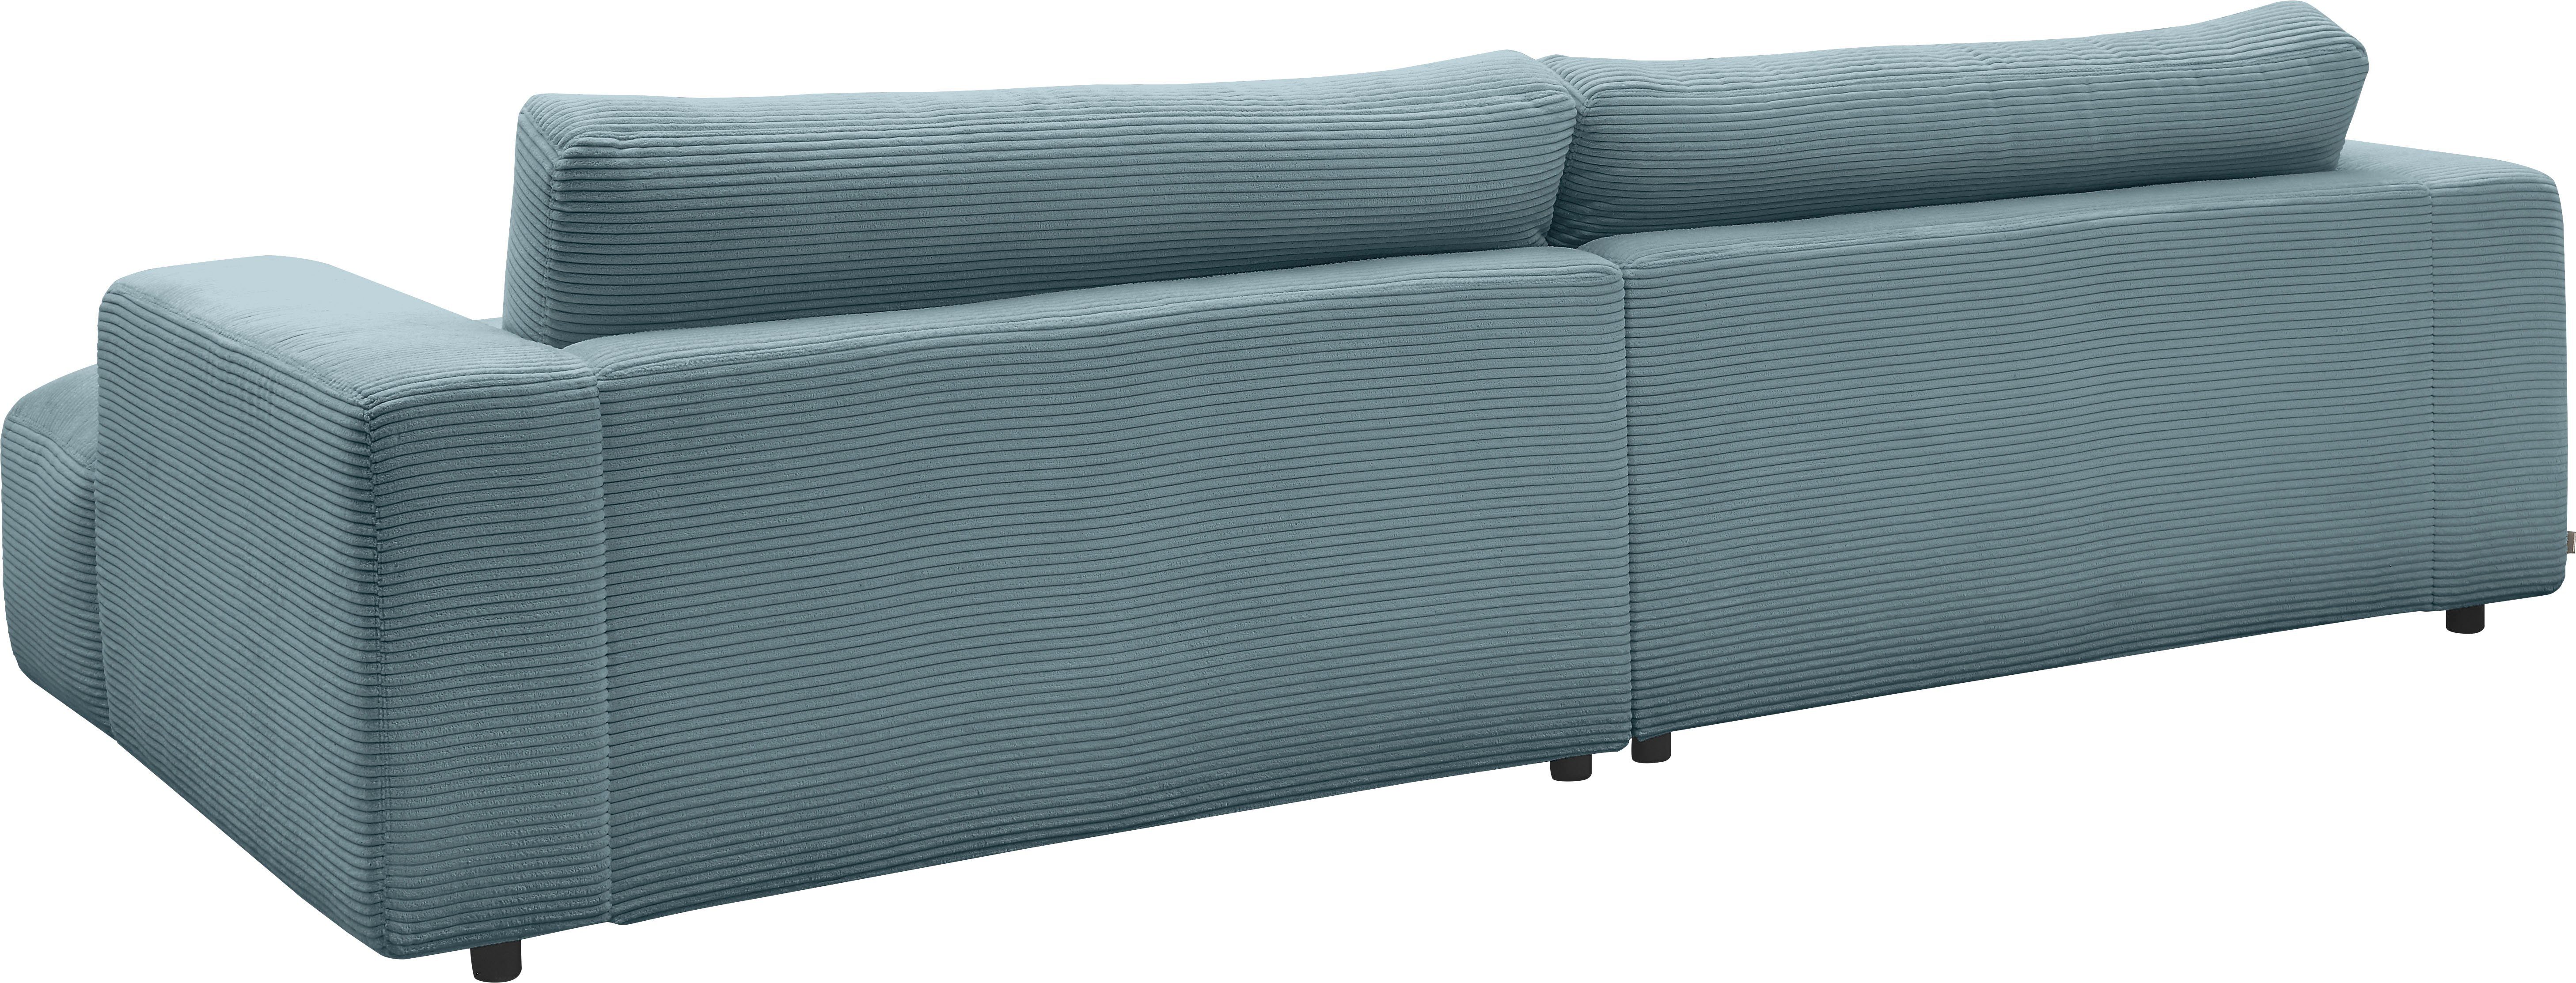 Lucia, Breite cm by Cord-Bezug, Musterring M branded petrol 292 Loungesofa GALLERY